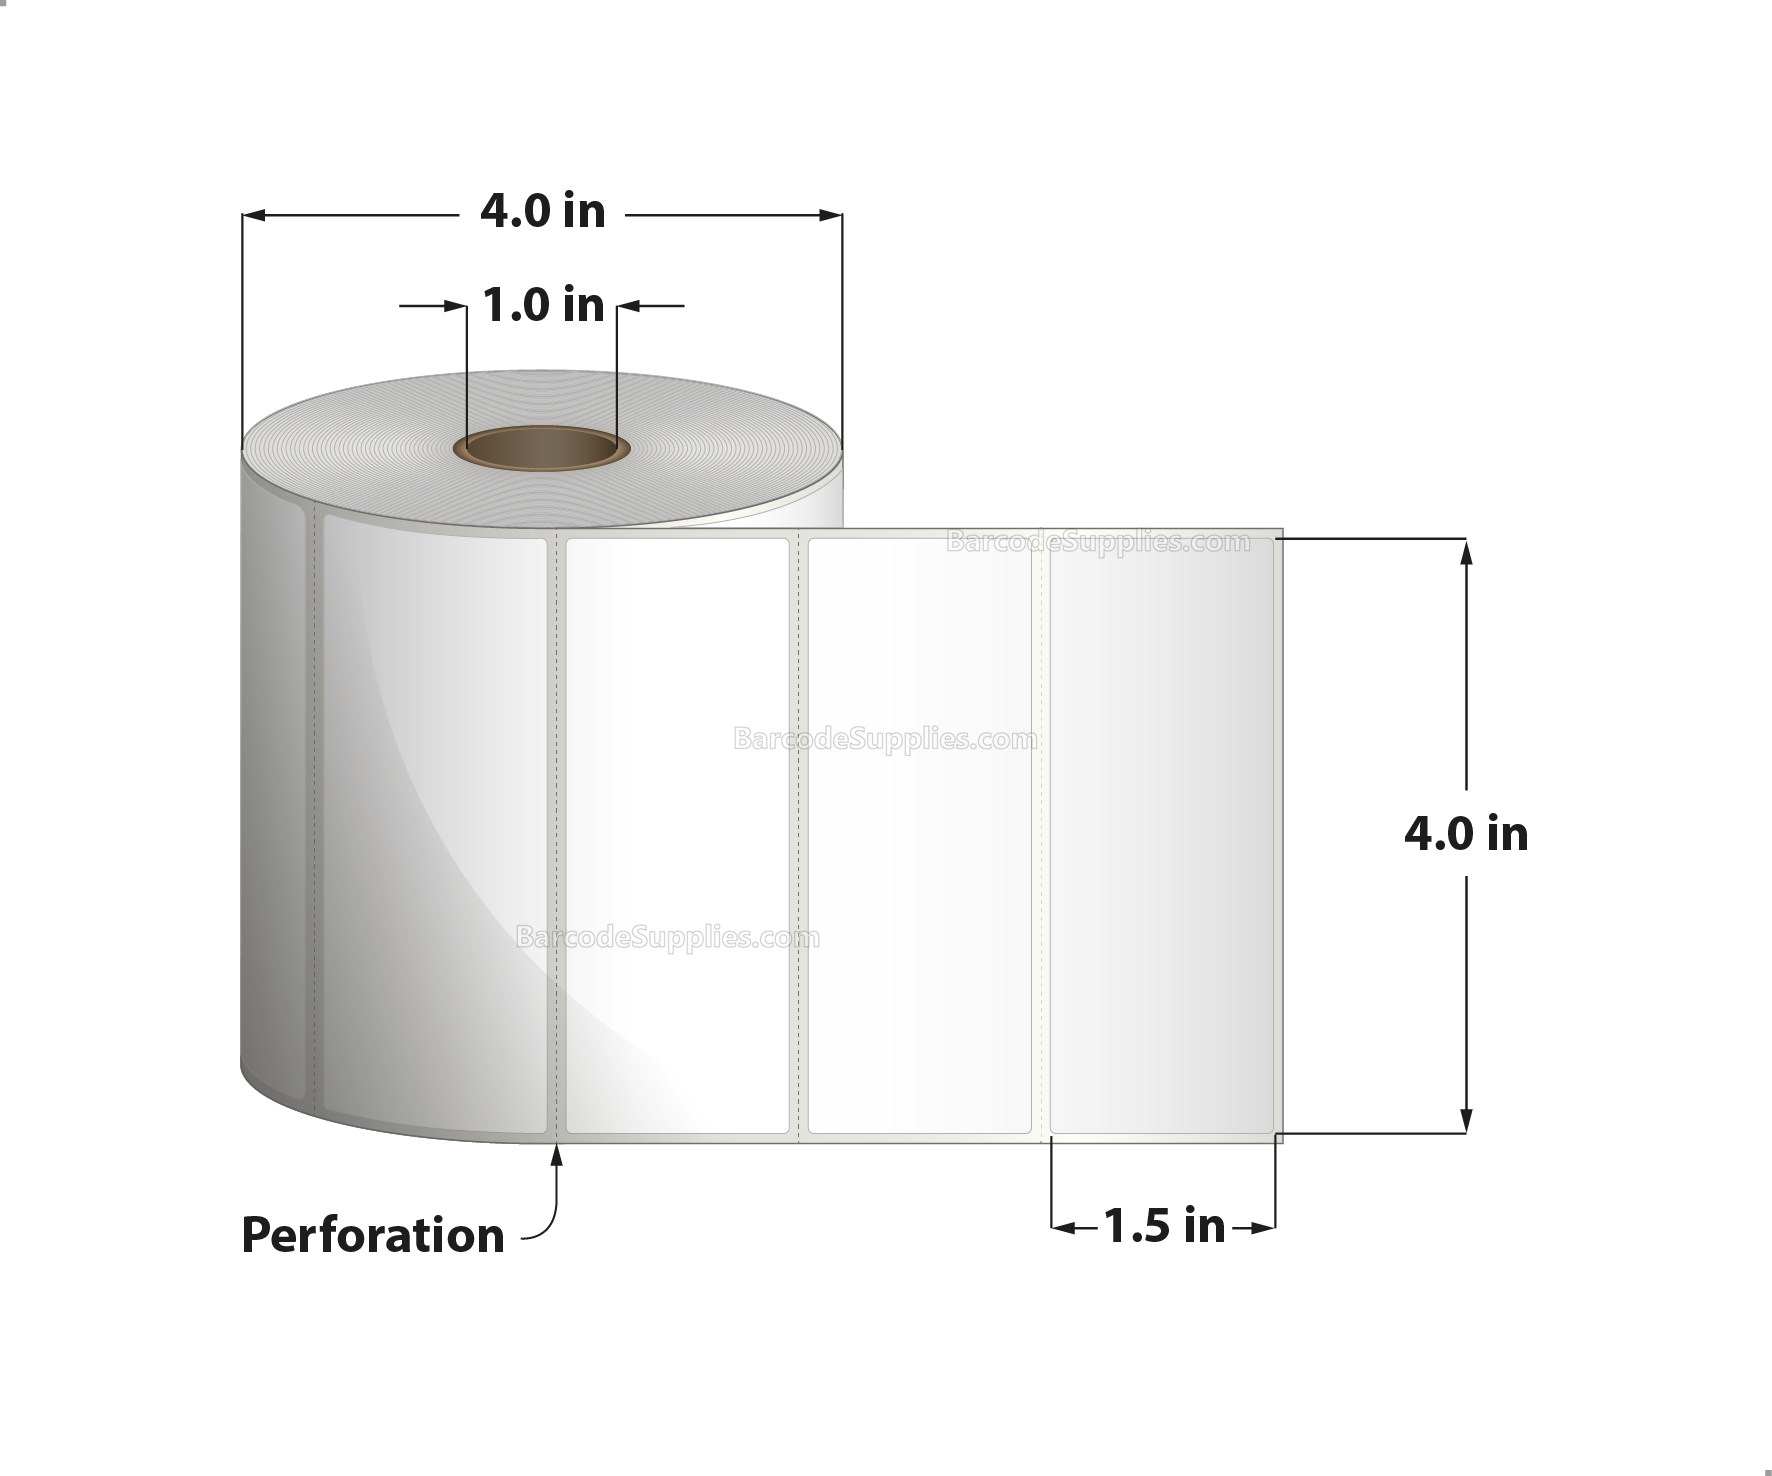 4 x 1.5 Thermal Transfer White Labels With Permanent Acrylic Adhesive - Perforated - 960 Labels Per Roll - Carton Of 4 Rolls - 3840 Labels Total - MPN: TH415-14PTT